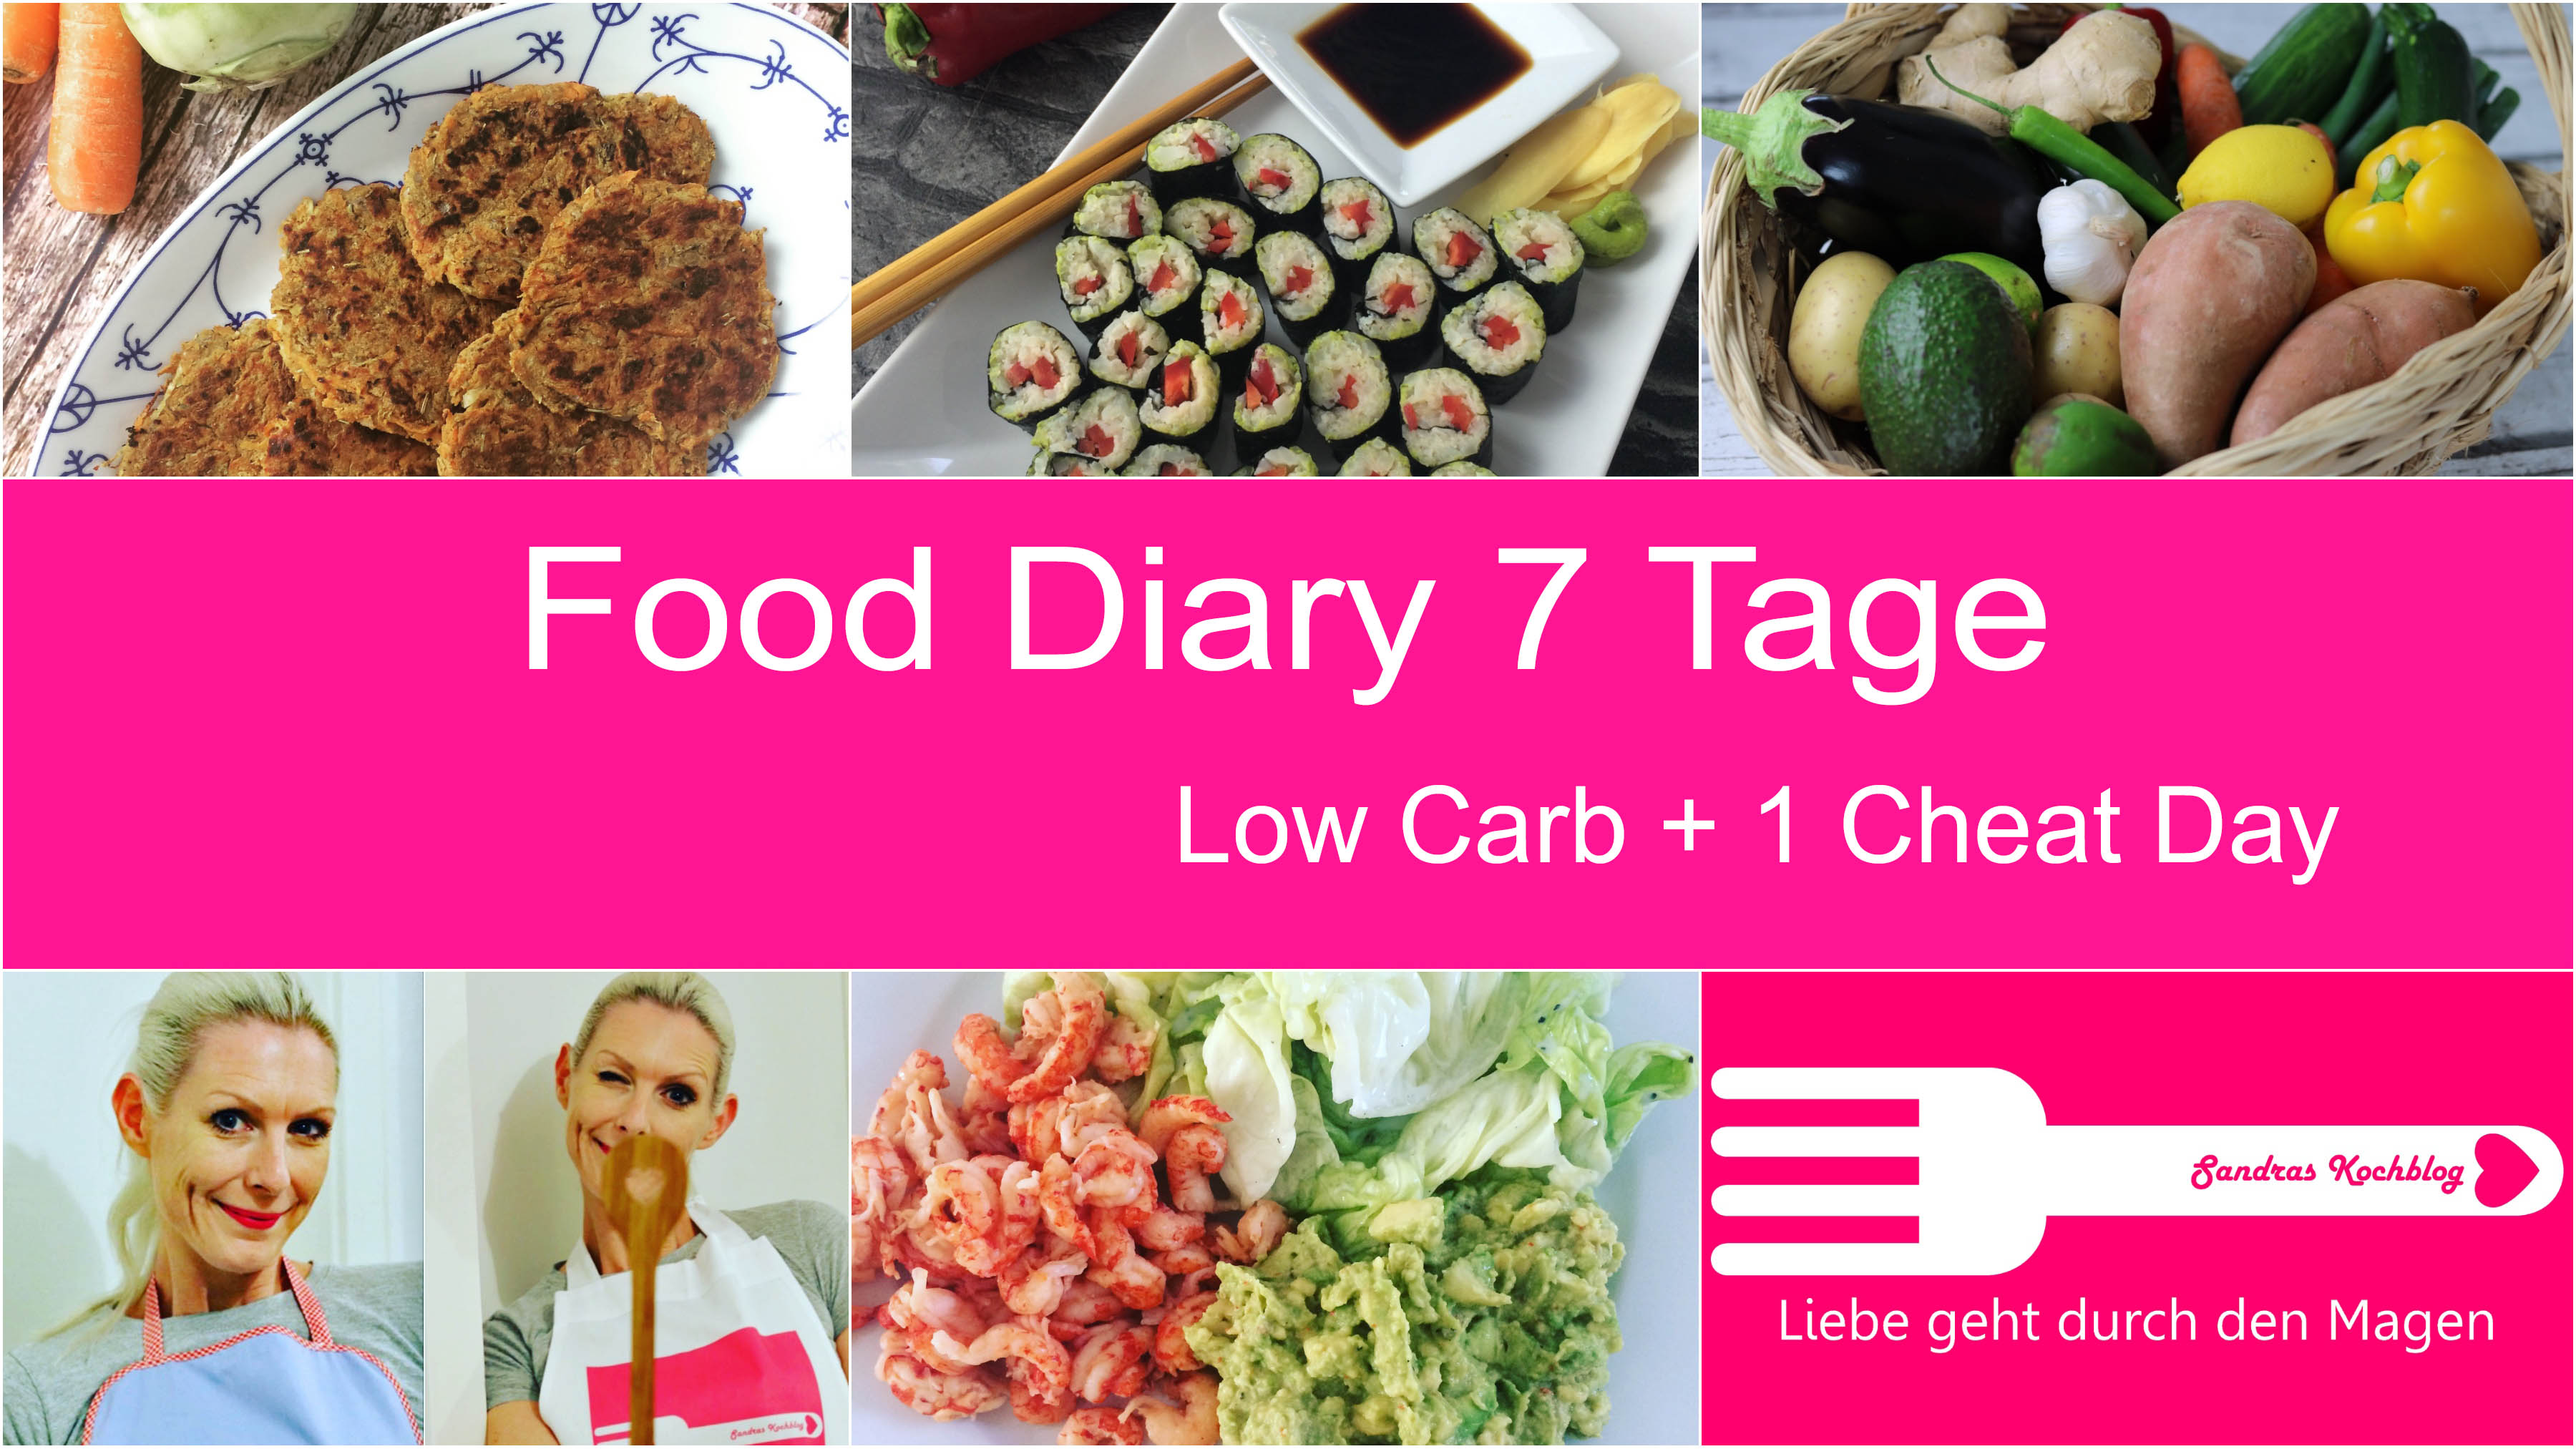 Food Diary 7 Tage Lowcarb + Cheatday